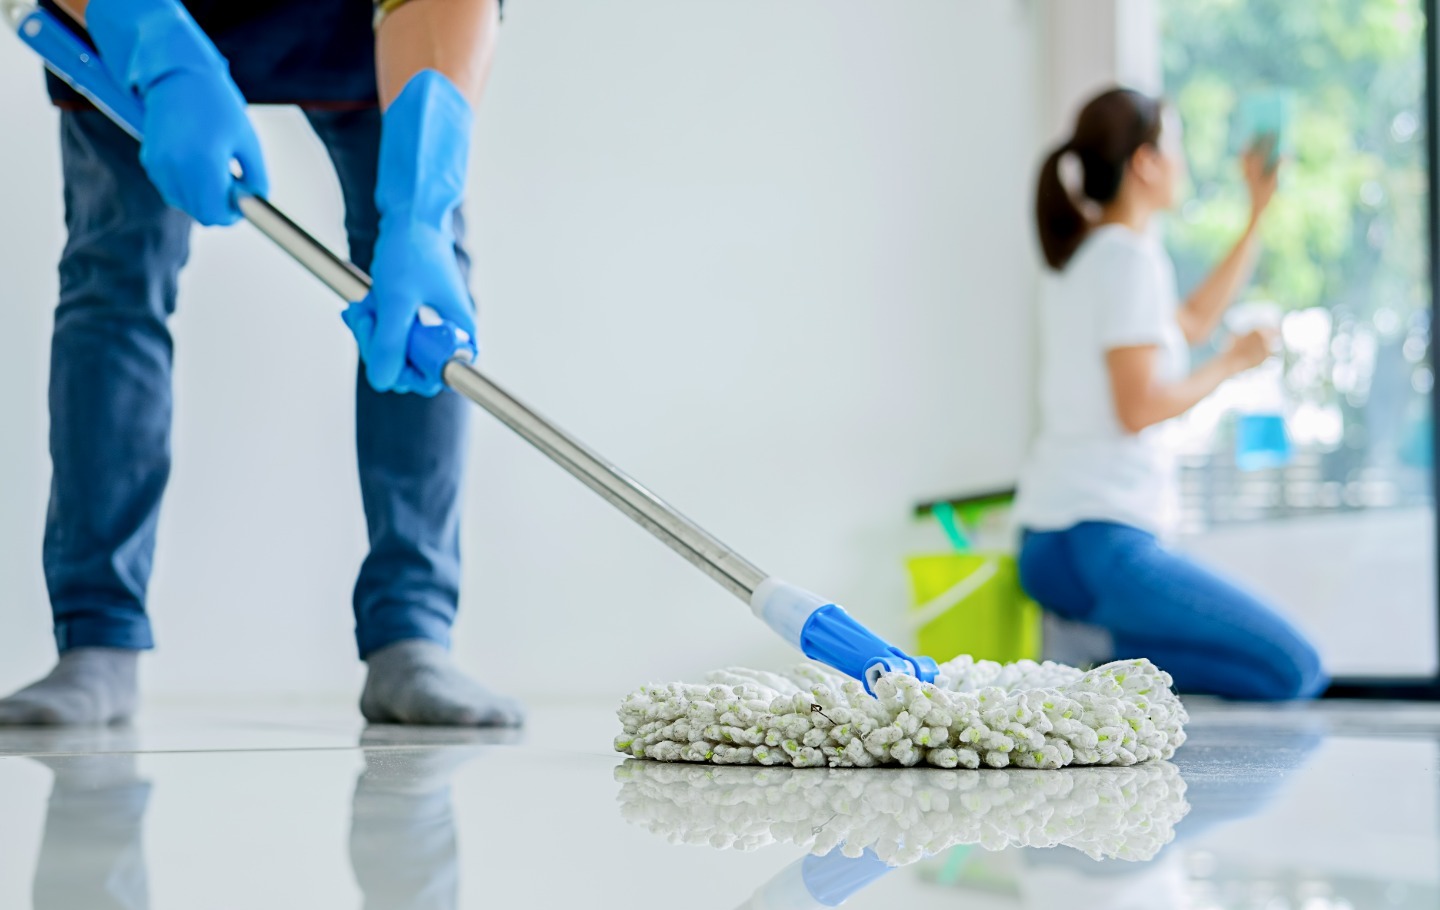 Best Carpet Cleaning Company